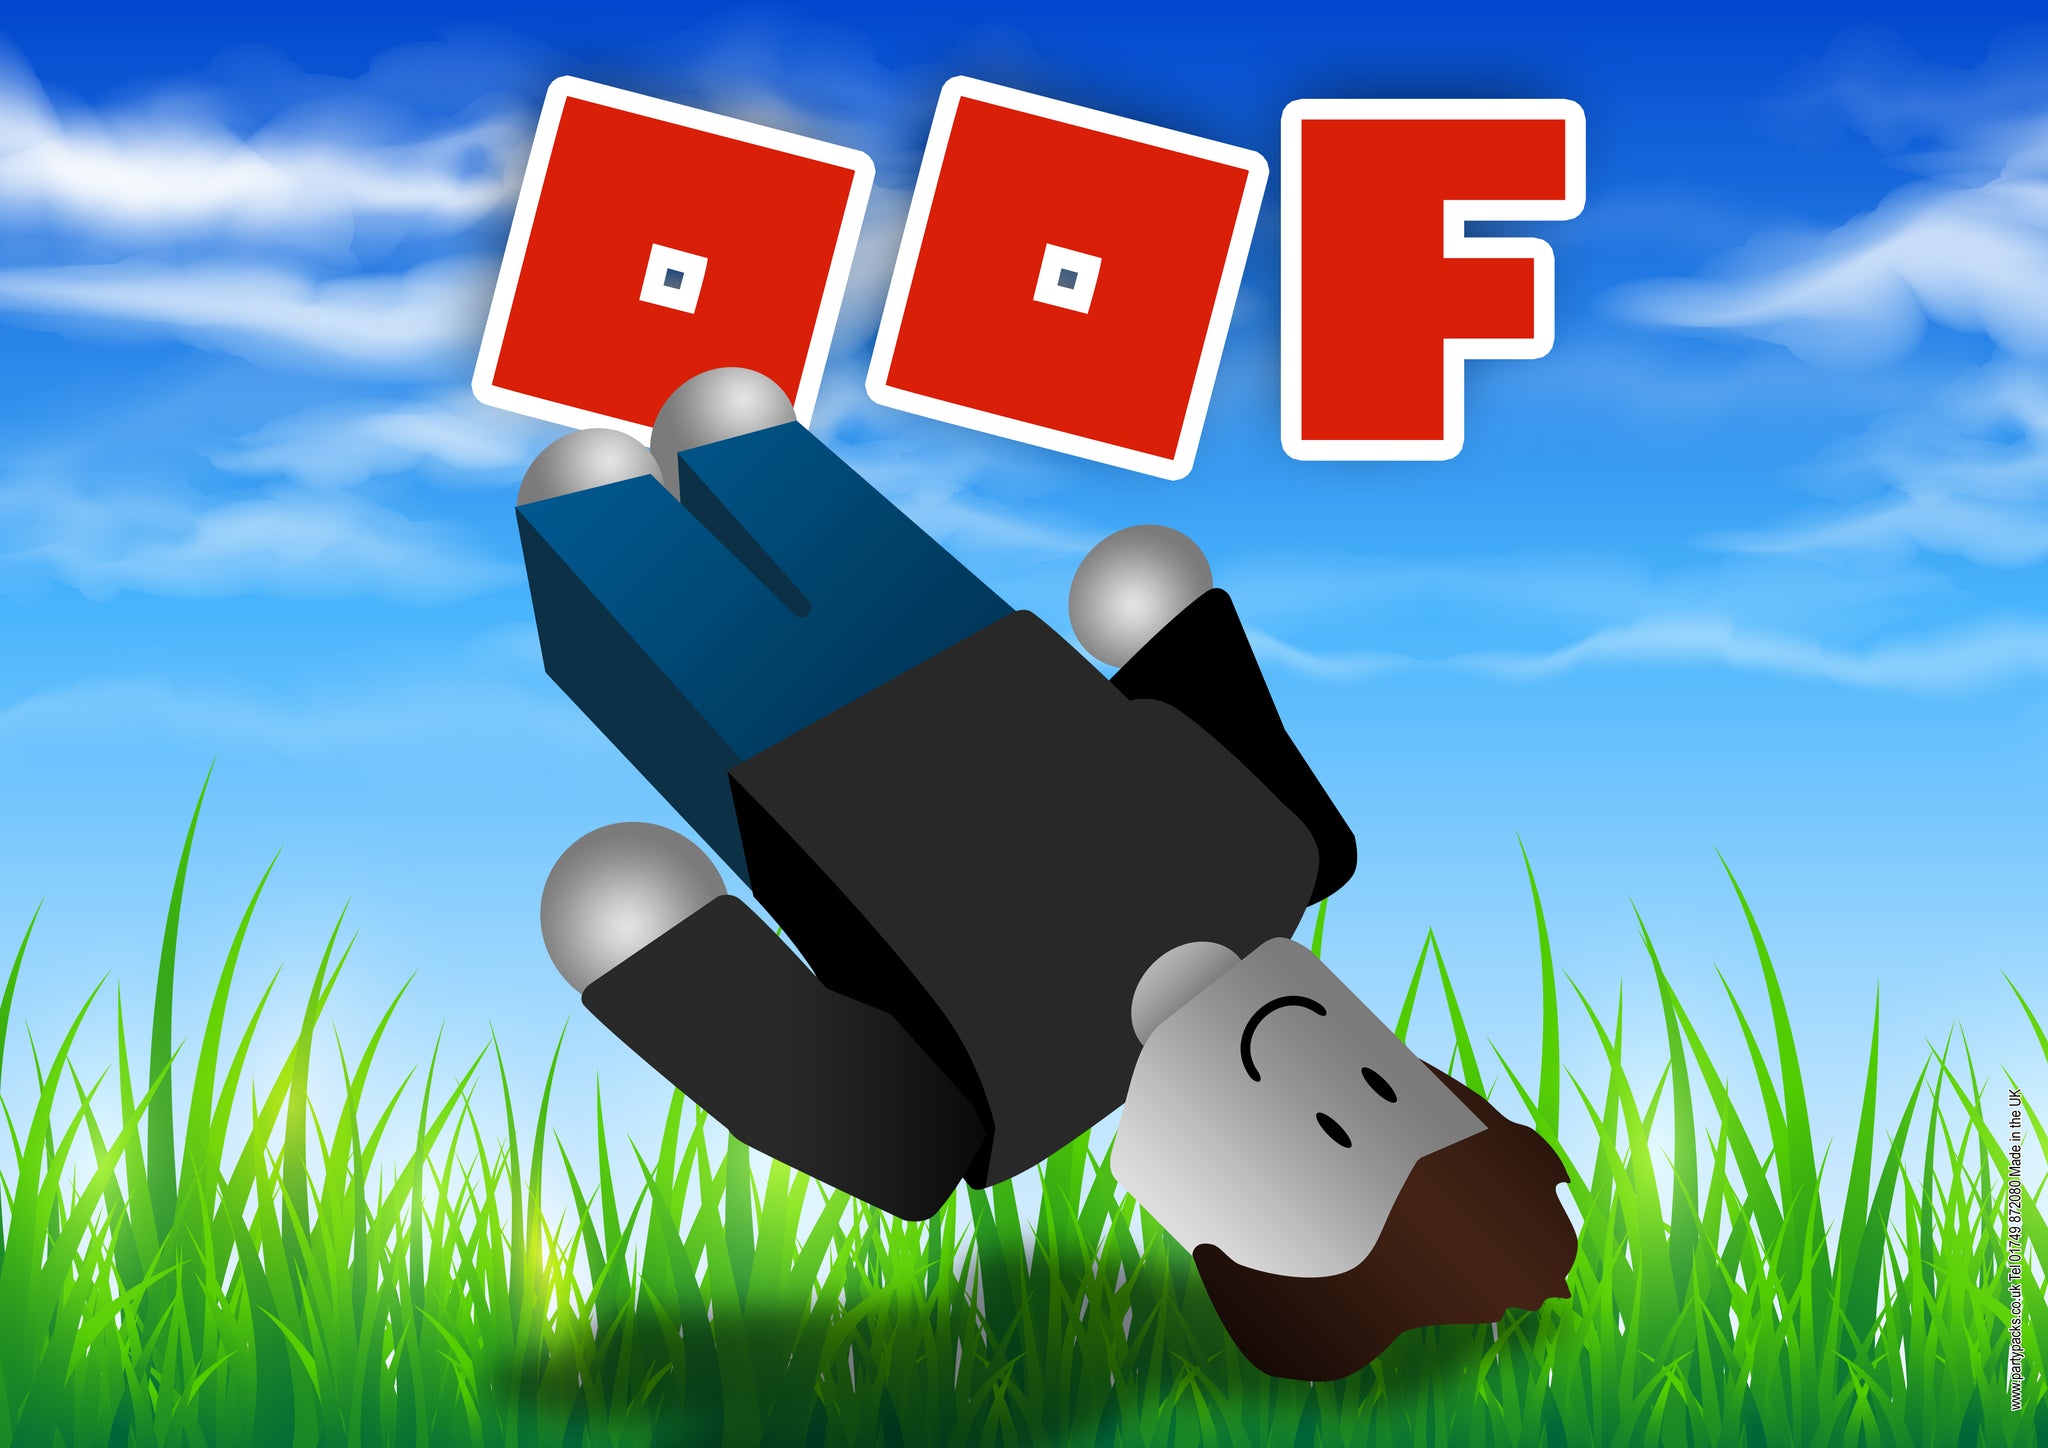 Blox Friends "Oof" Poster Decoration - A3